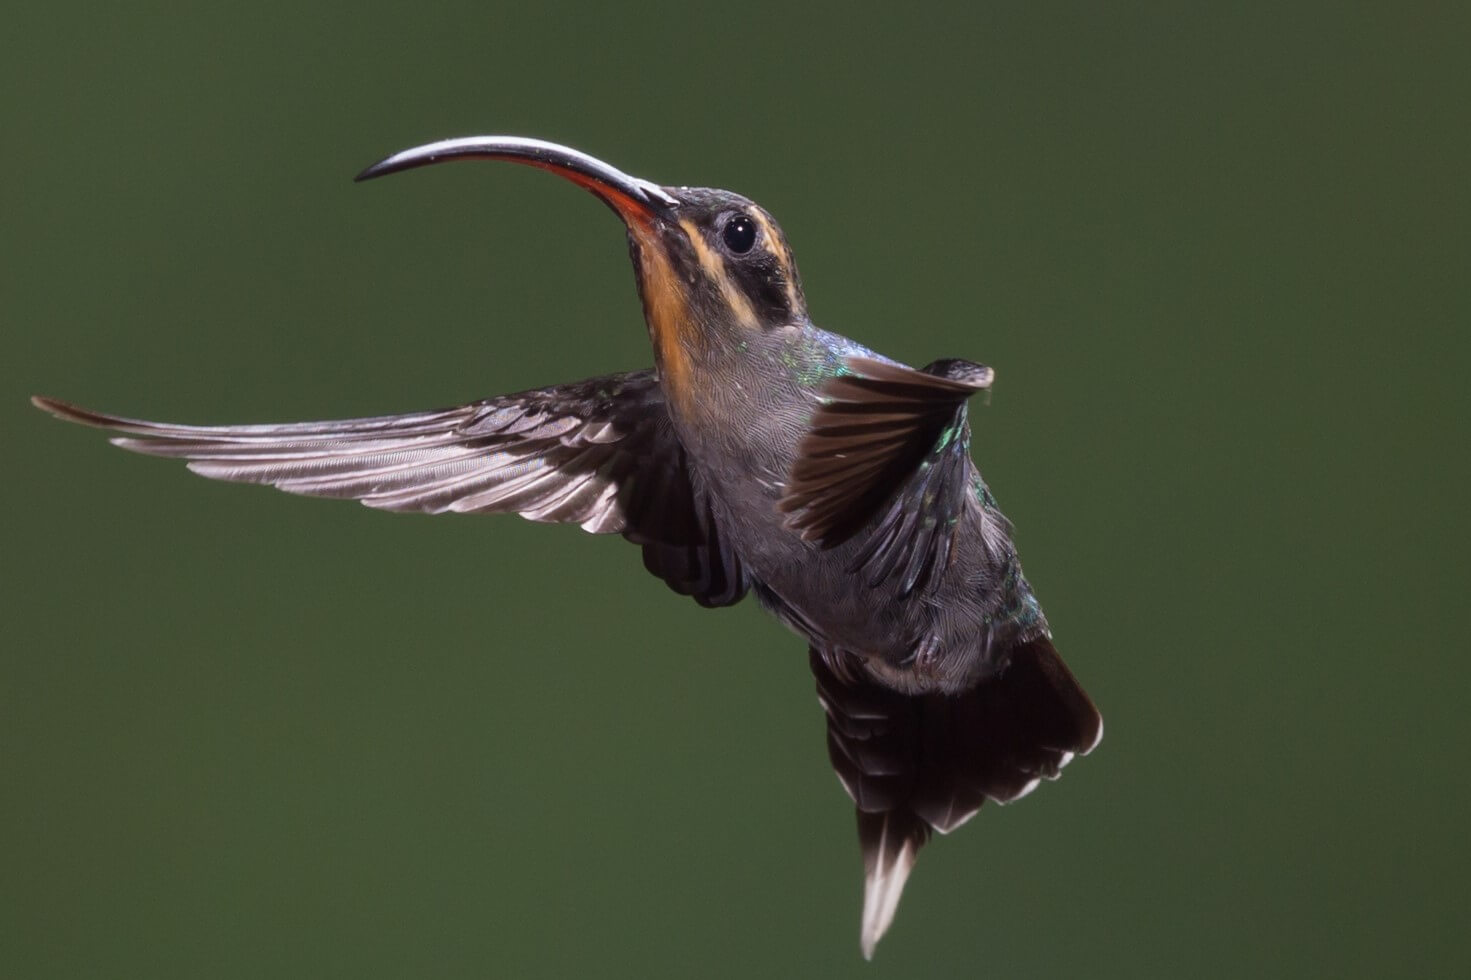 This photo shows a green hermit in flight